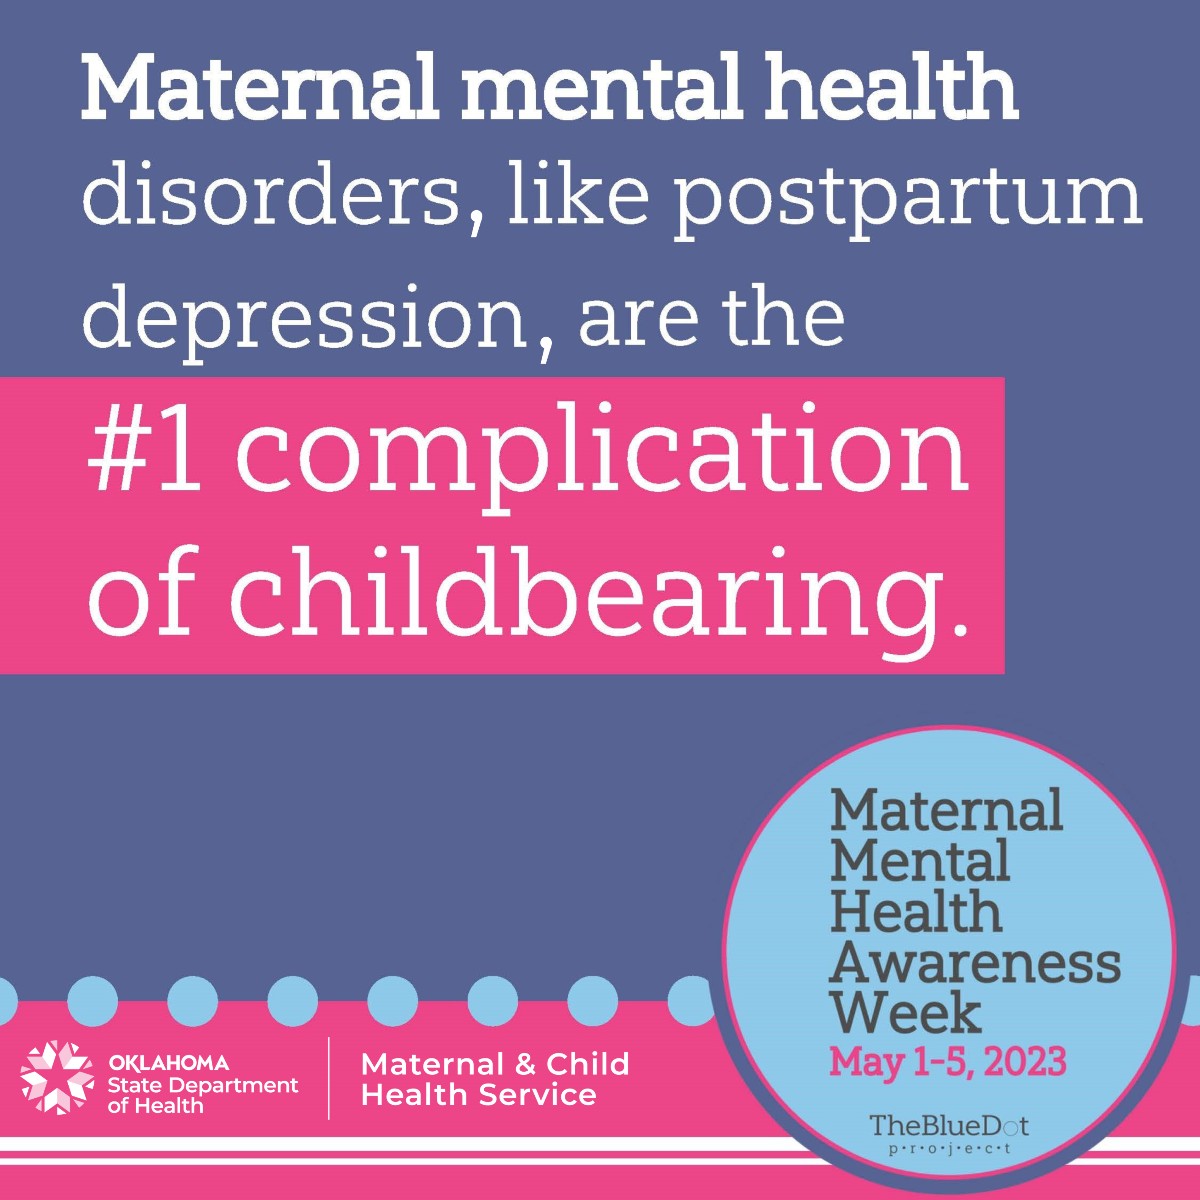 Maternal mental health disorders are the most common complications faced by mothers. When we raise awareness, we can help combat stigma and normalize these challenges that new parents face. Learn more here: fal.cn/3xSiI #MMHWeek2023 @TheBlueDotPrj